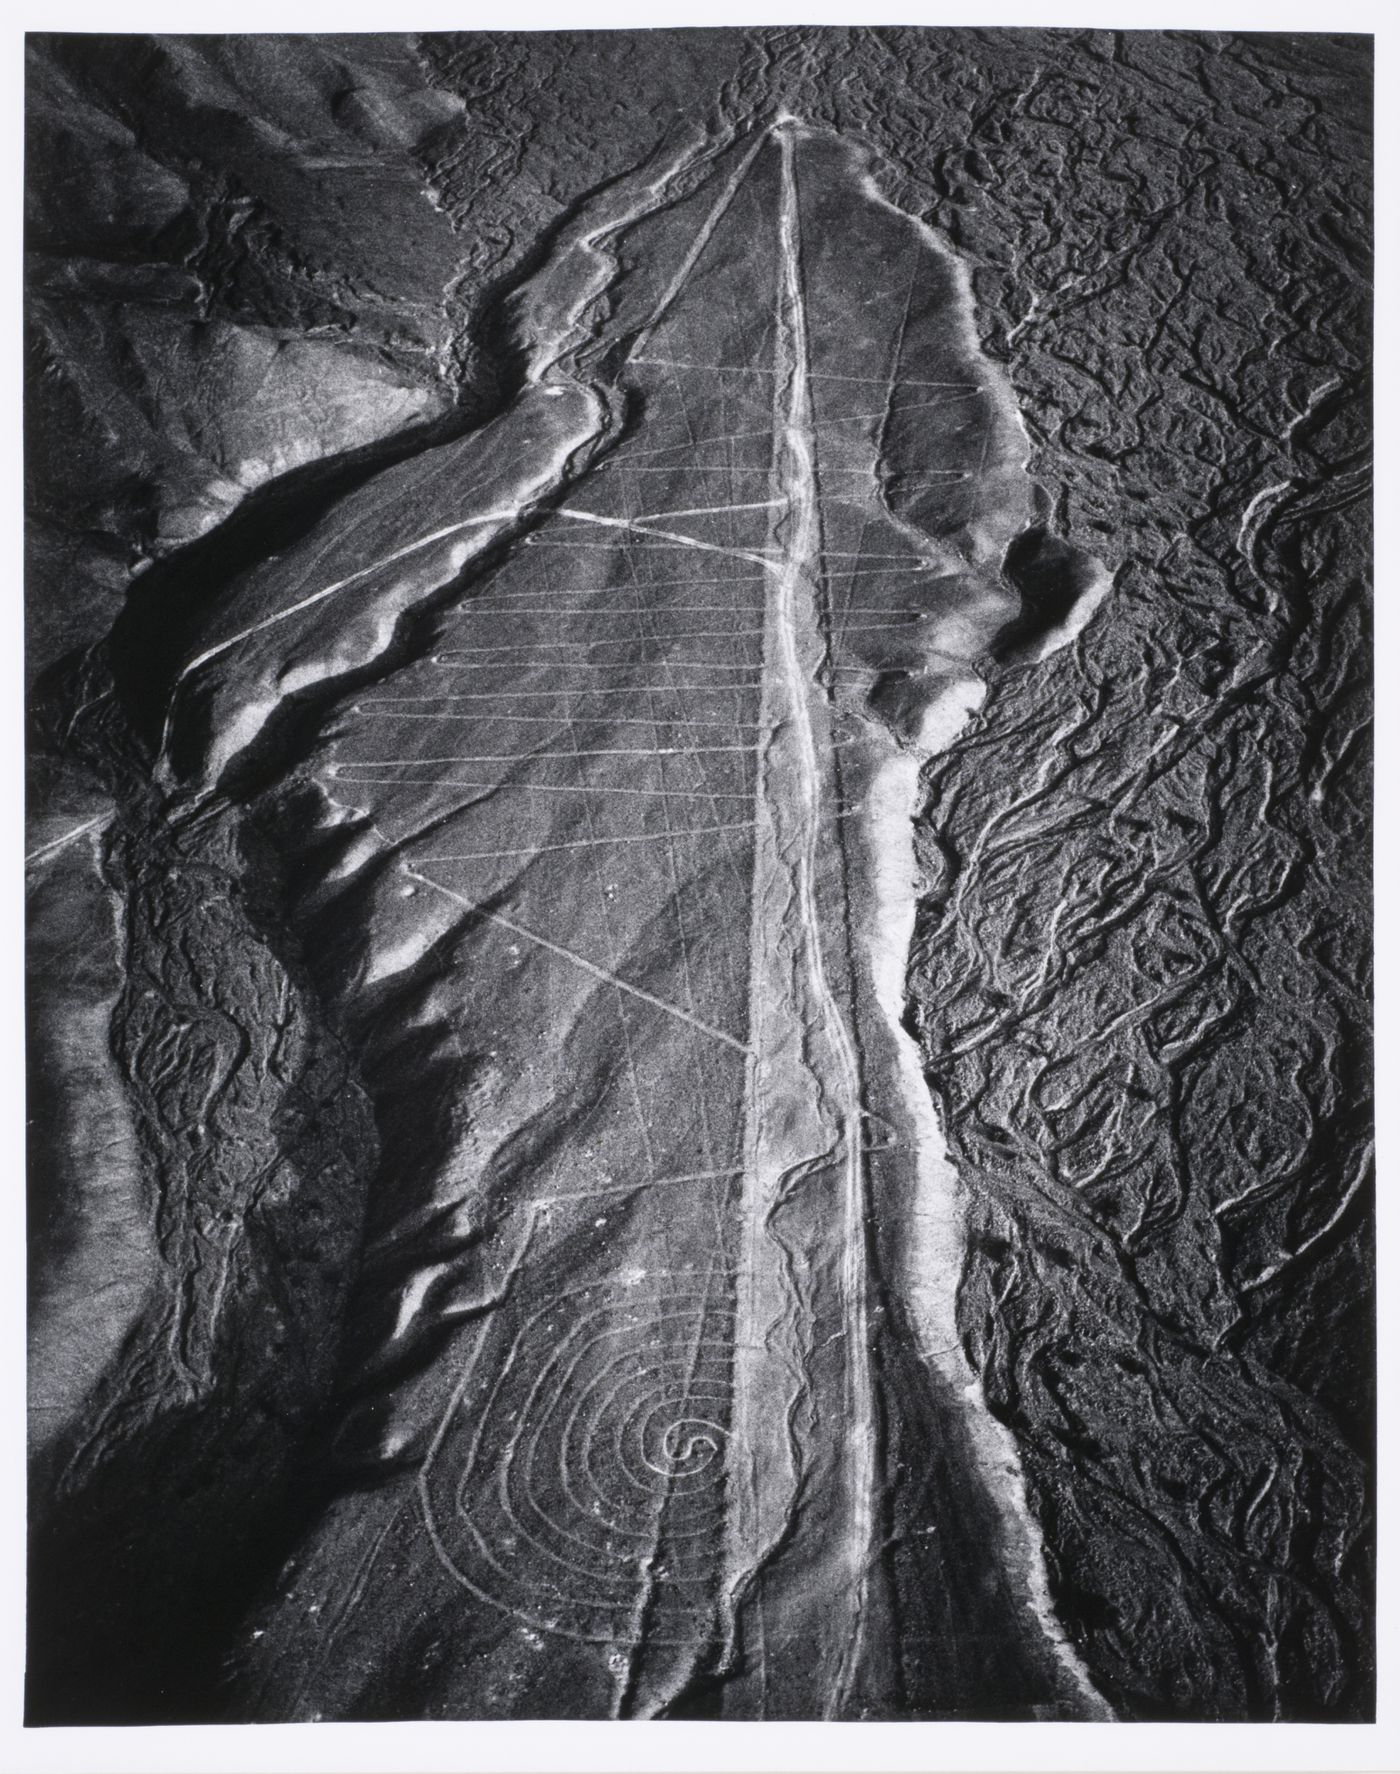 Aerial view of the ancient earthwork "Yarn & Needle", Nazca, Peru